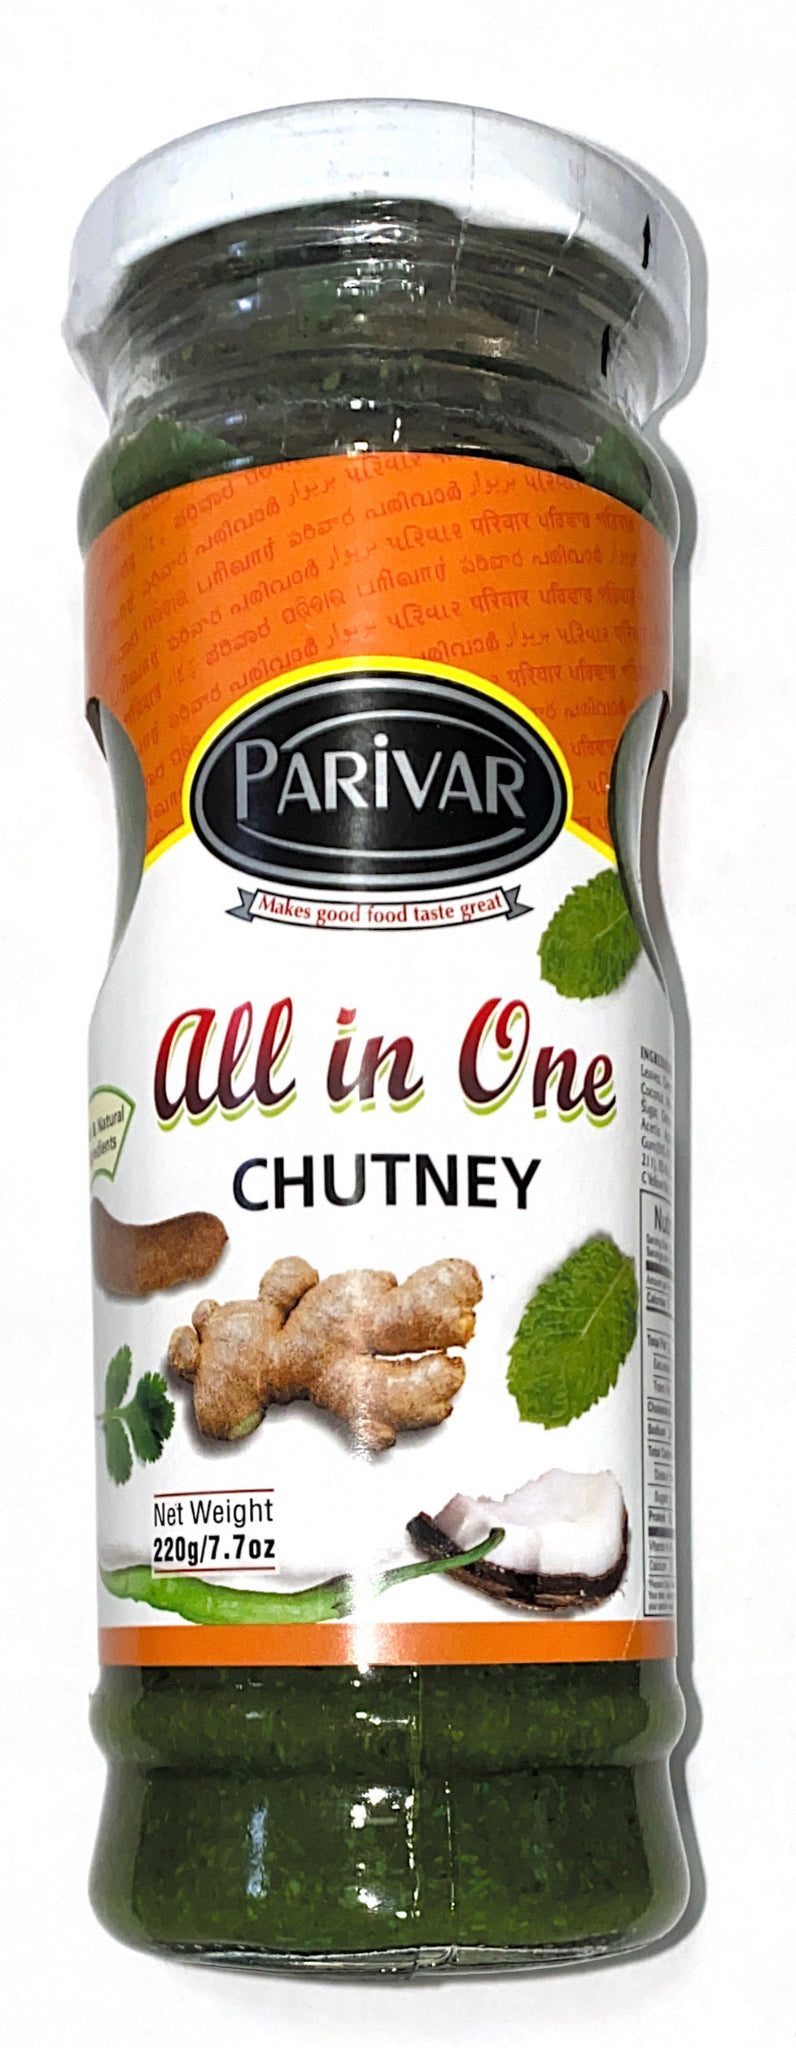 All in One Chutney